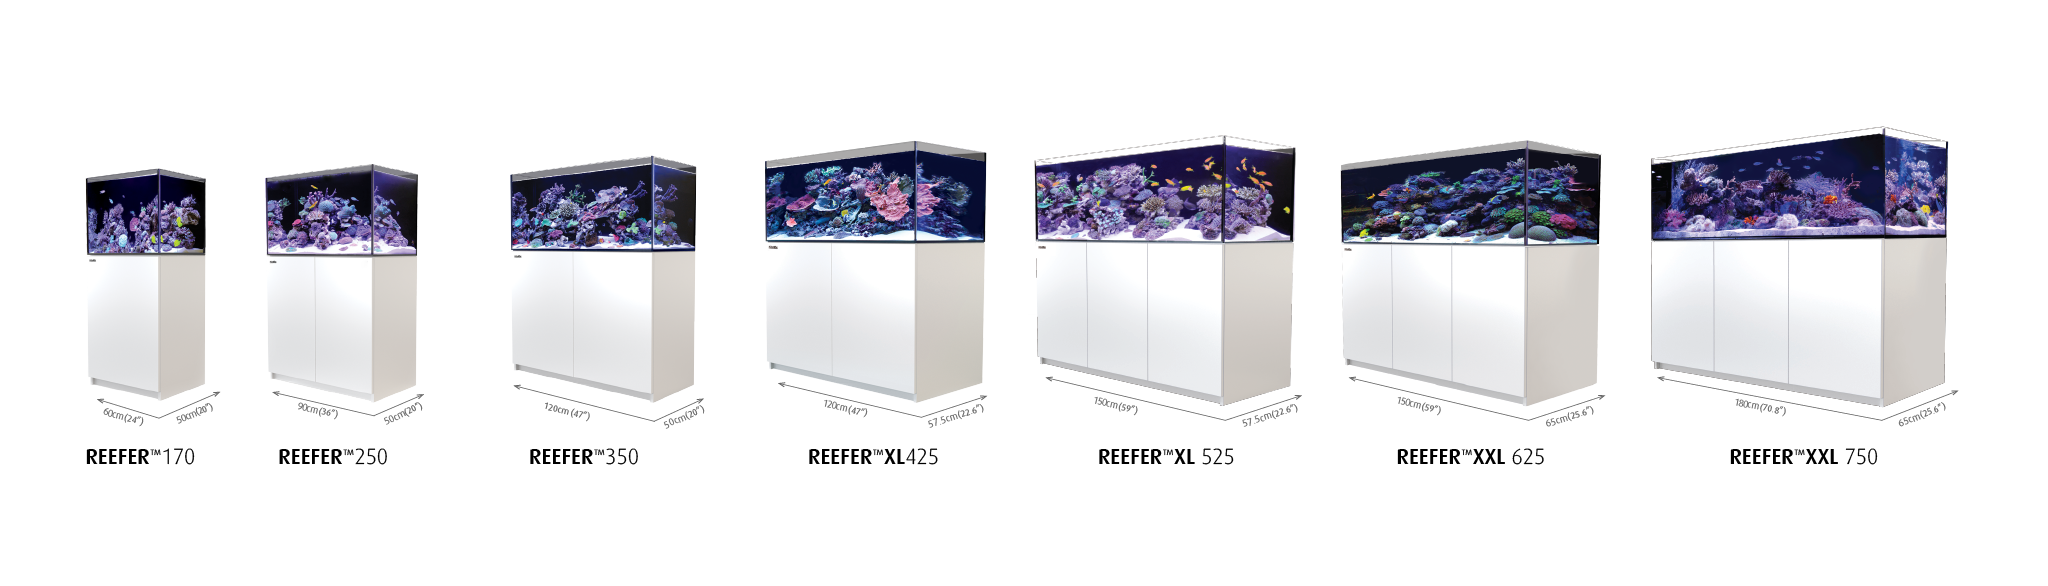 RED SEA Reefer 625 G2 Deluxe Complete System 